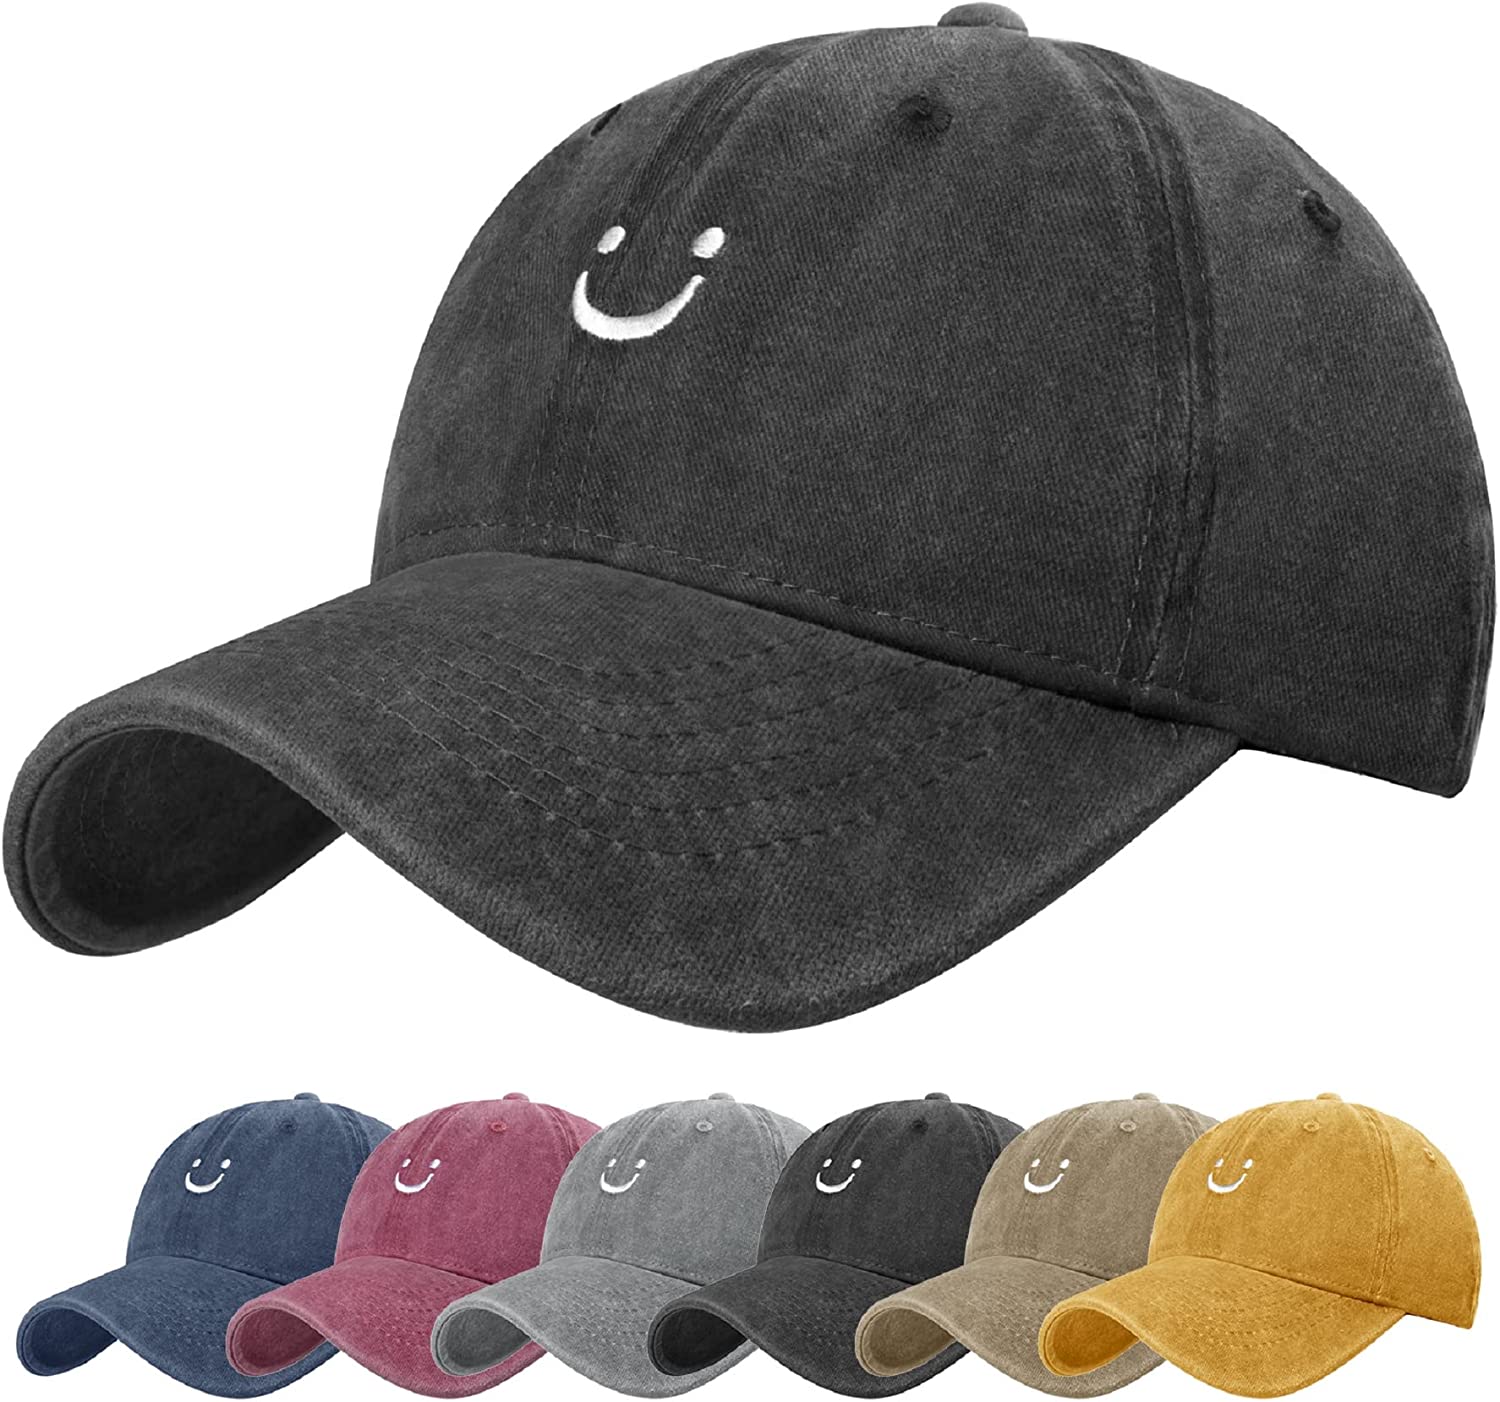 High Quality Sports Hats For Men And Women Cotton Adjustable Baseball Cap